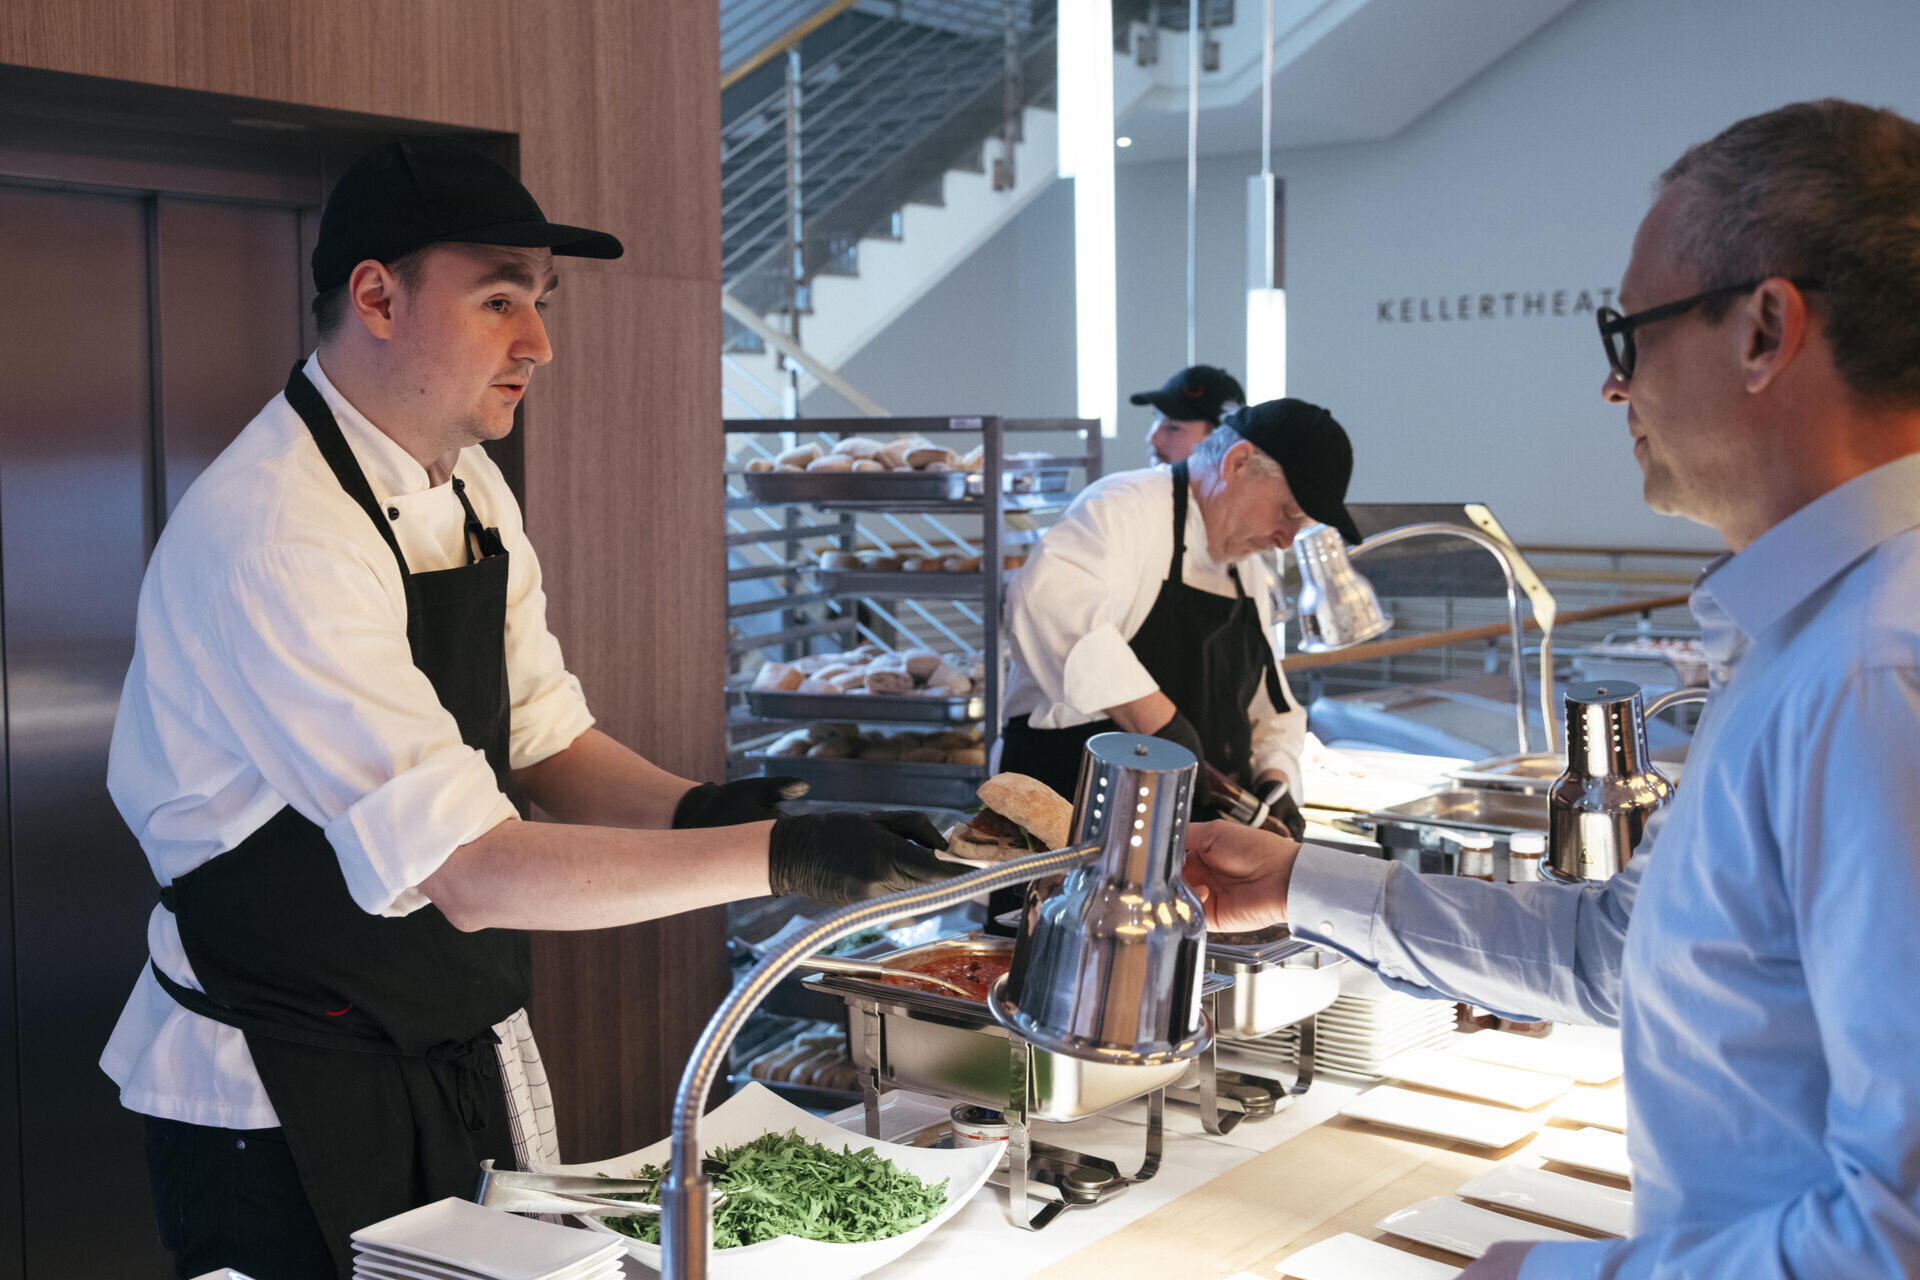 Fotogallery Digital Summit: il gustosissimo catering